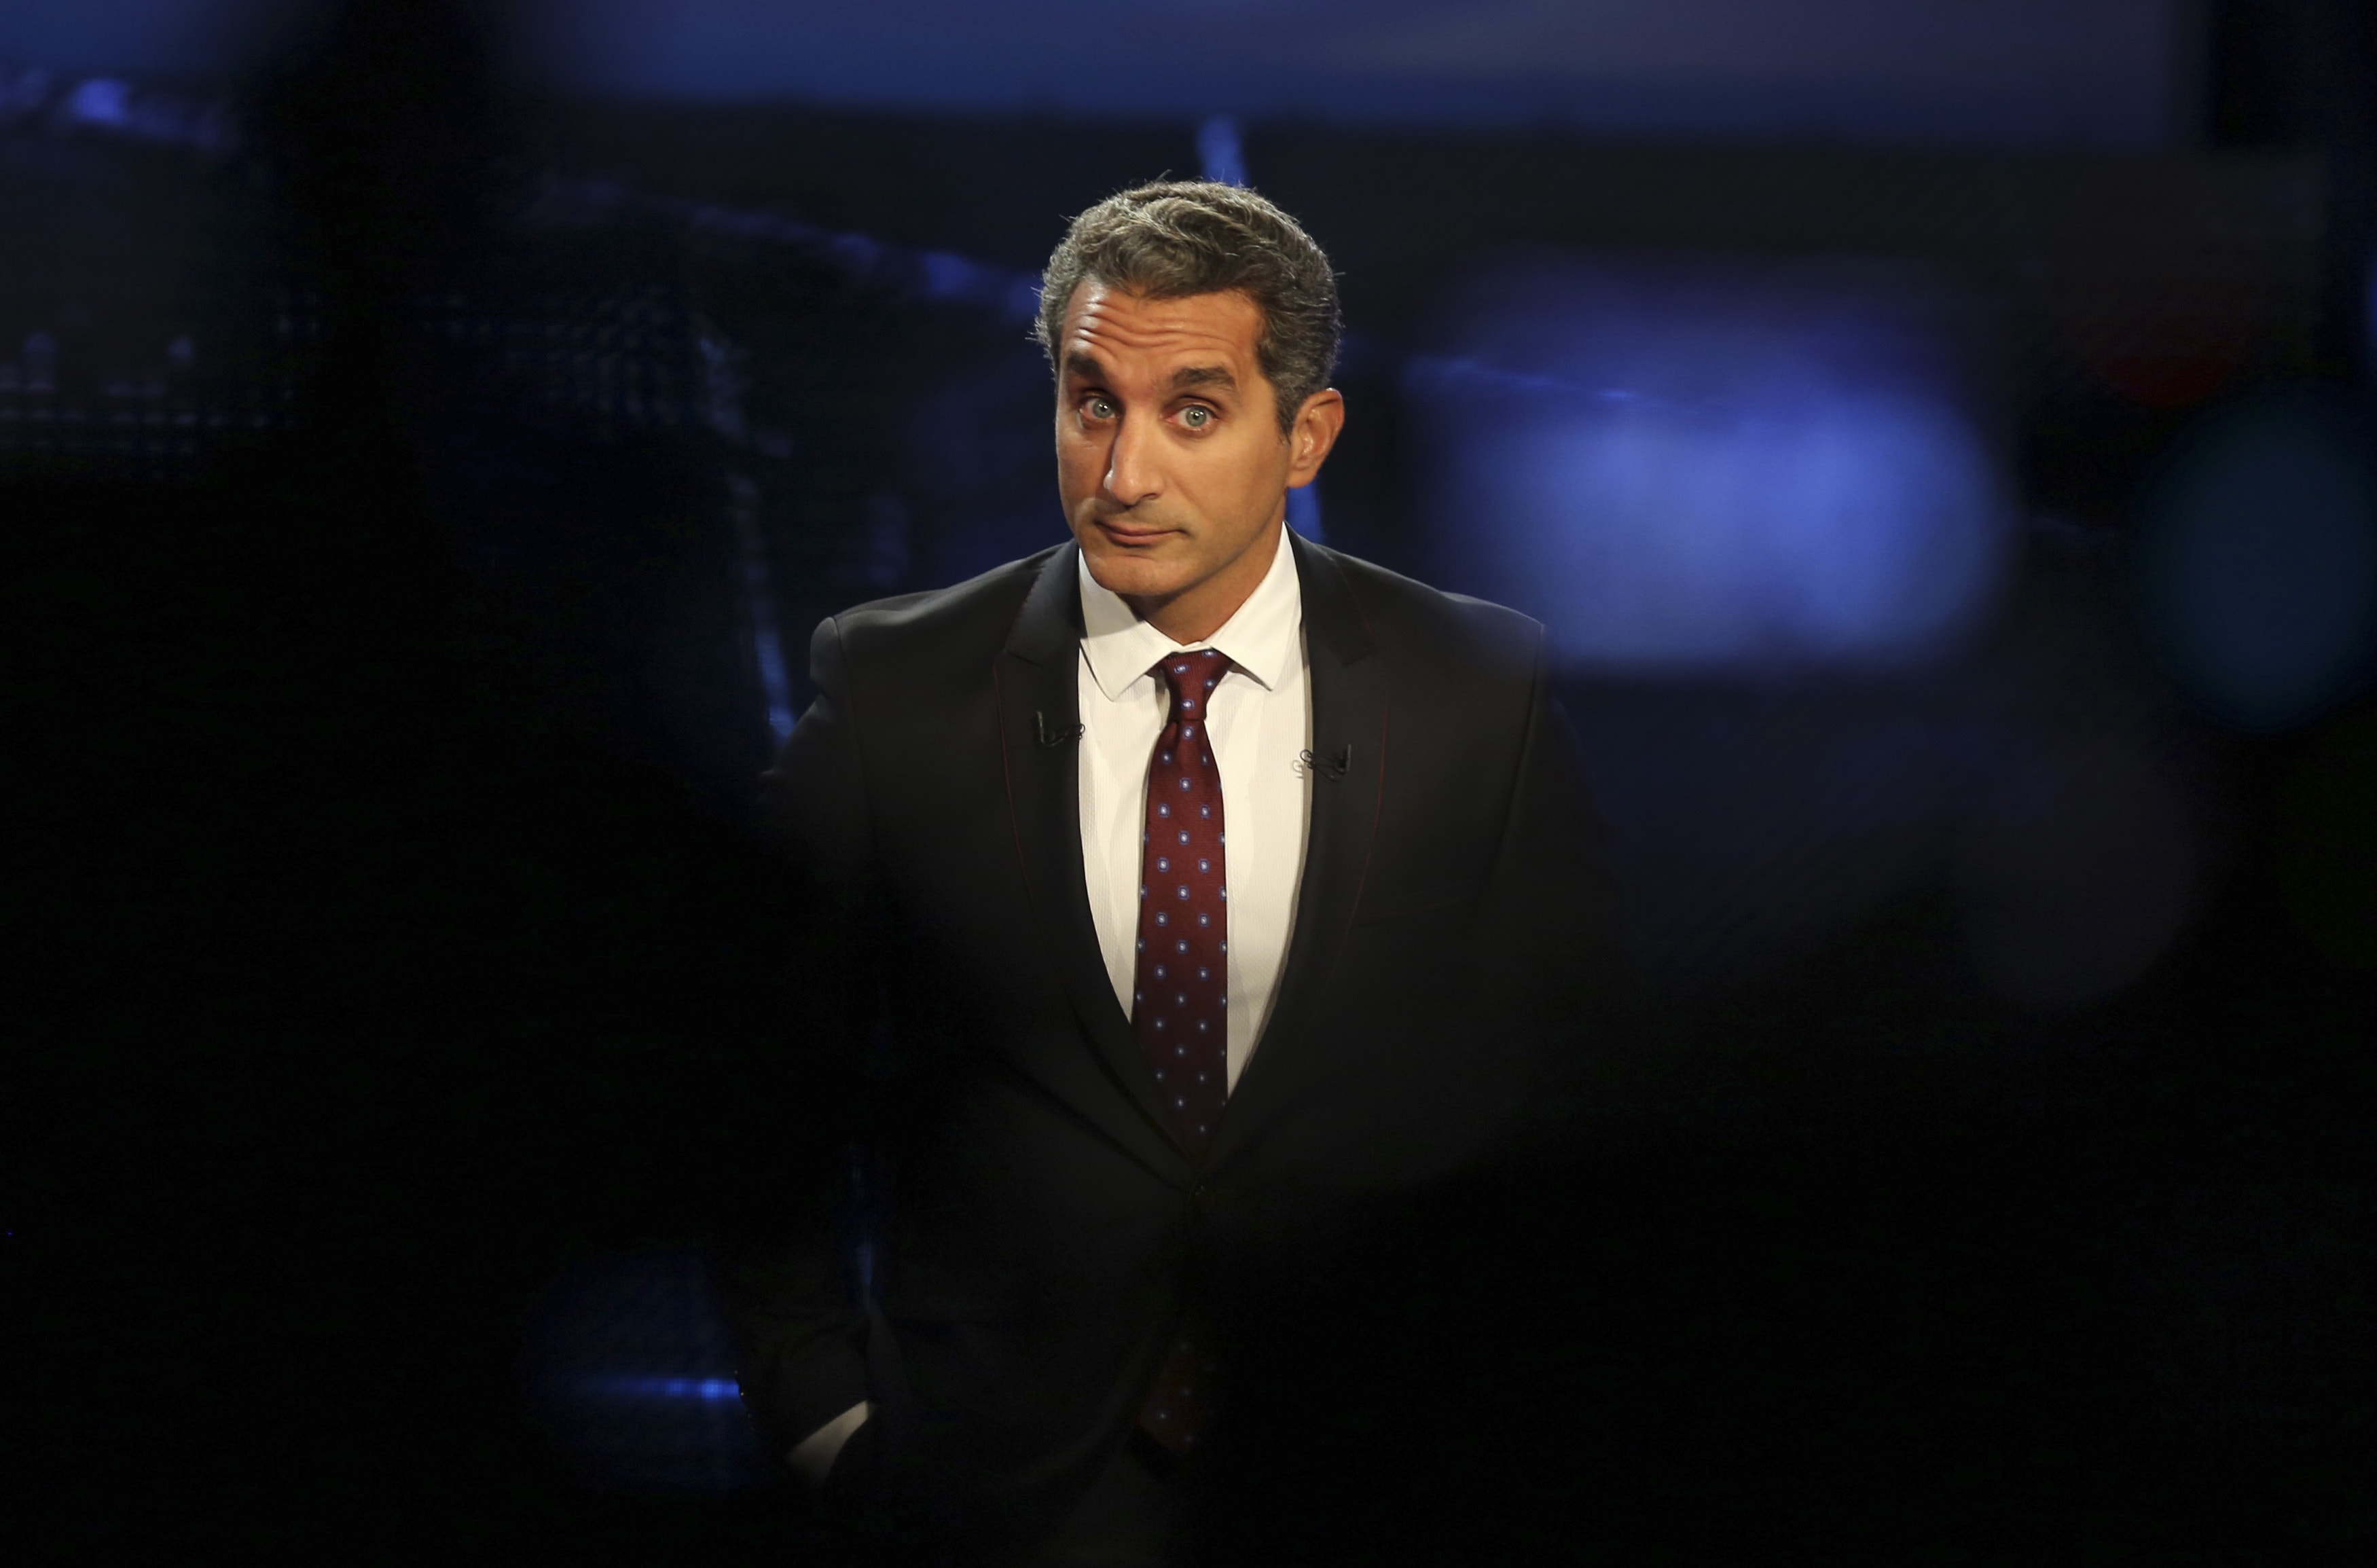 Popular Egyptian satirist Bassem Youssef talks during a news conference in Cairo on 2 June 2014, REUTERS/Mohamed Abd El Ghany